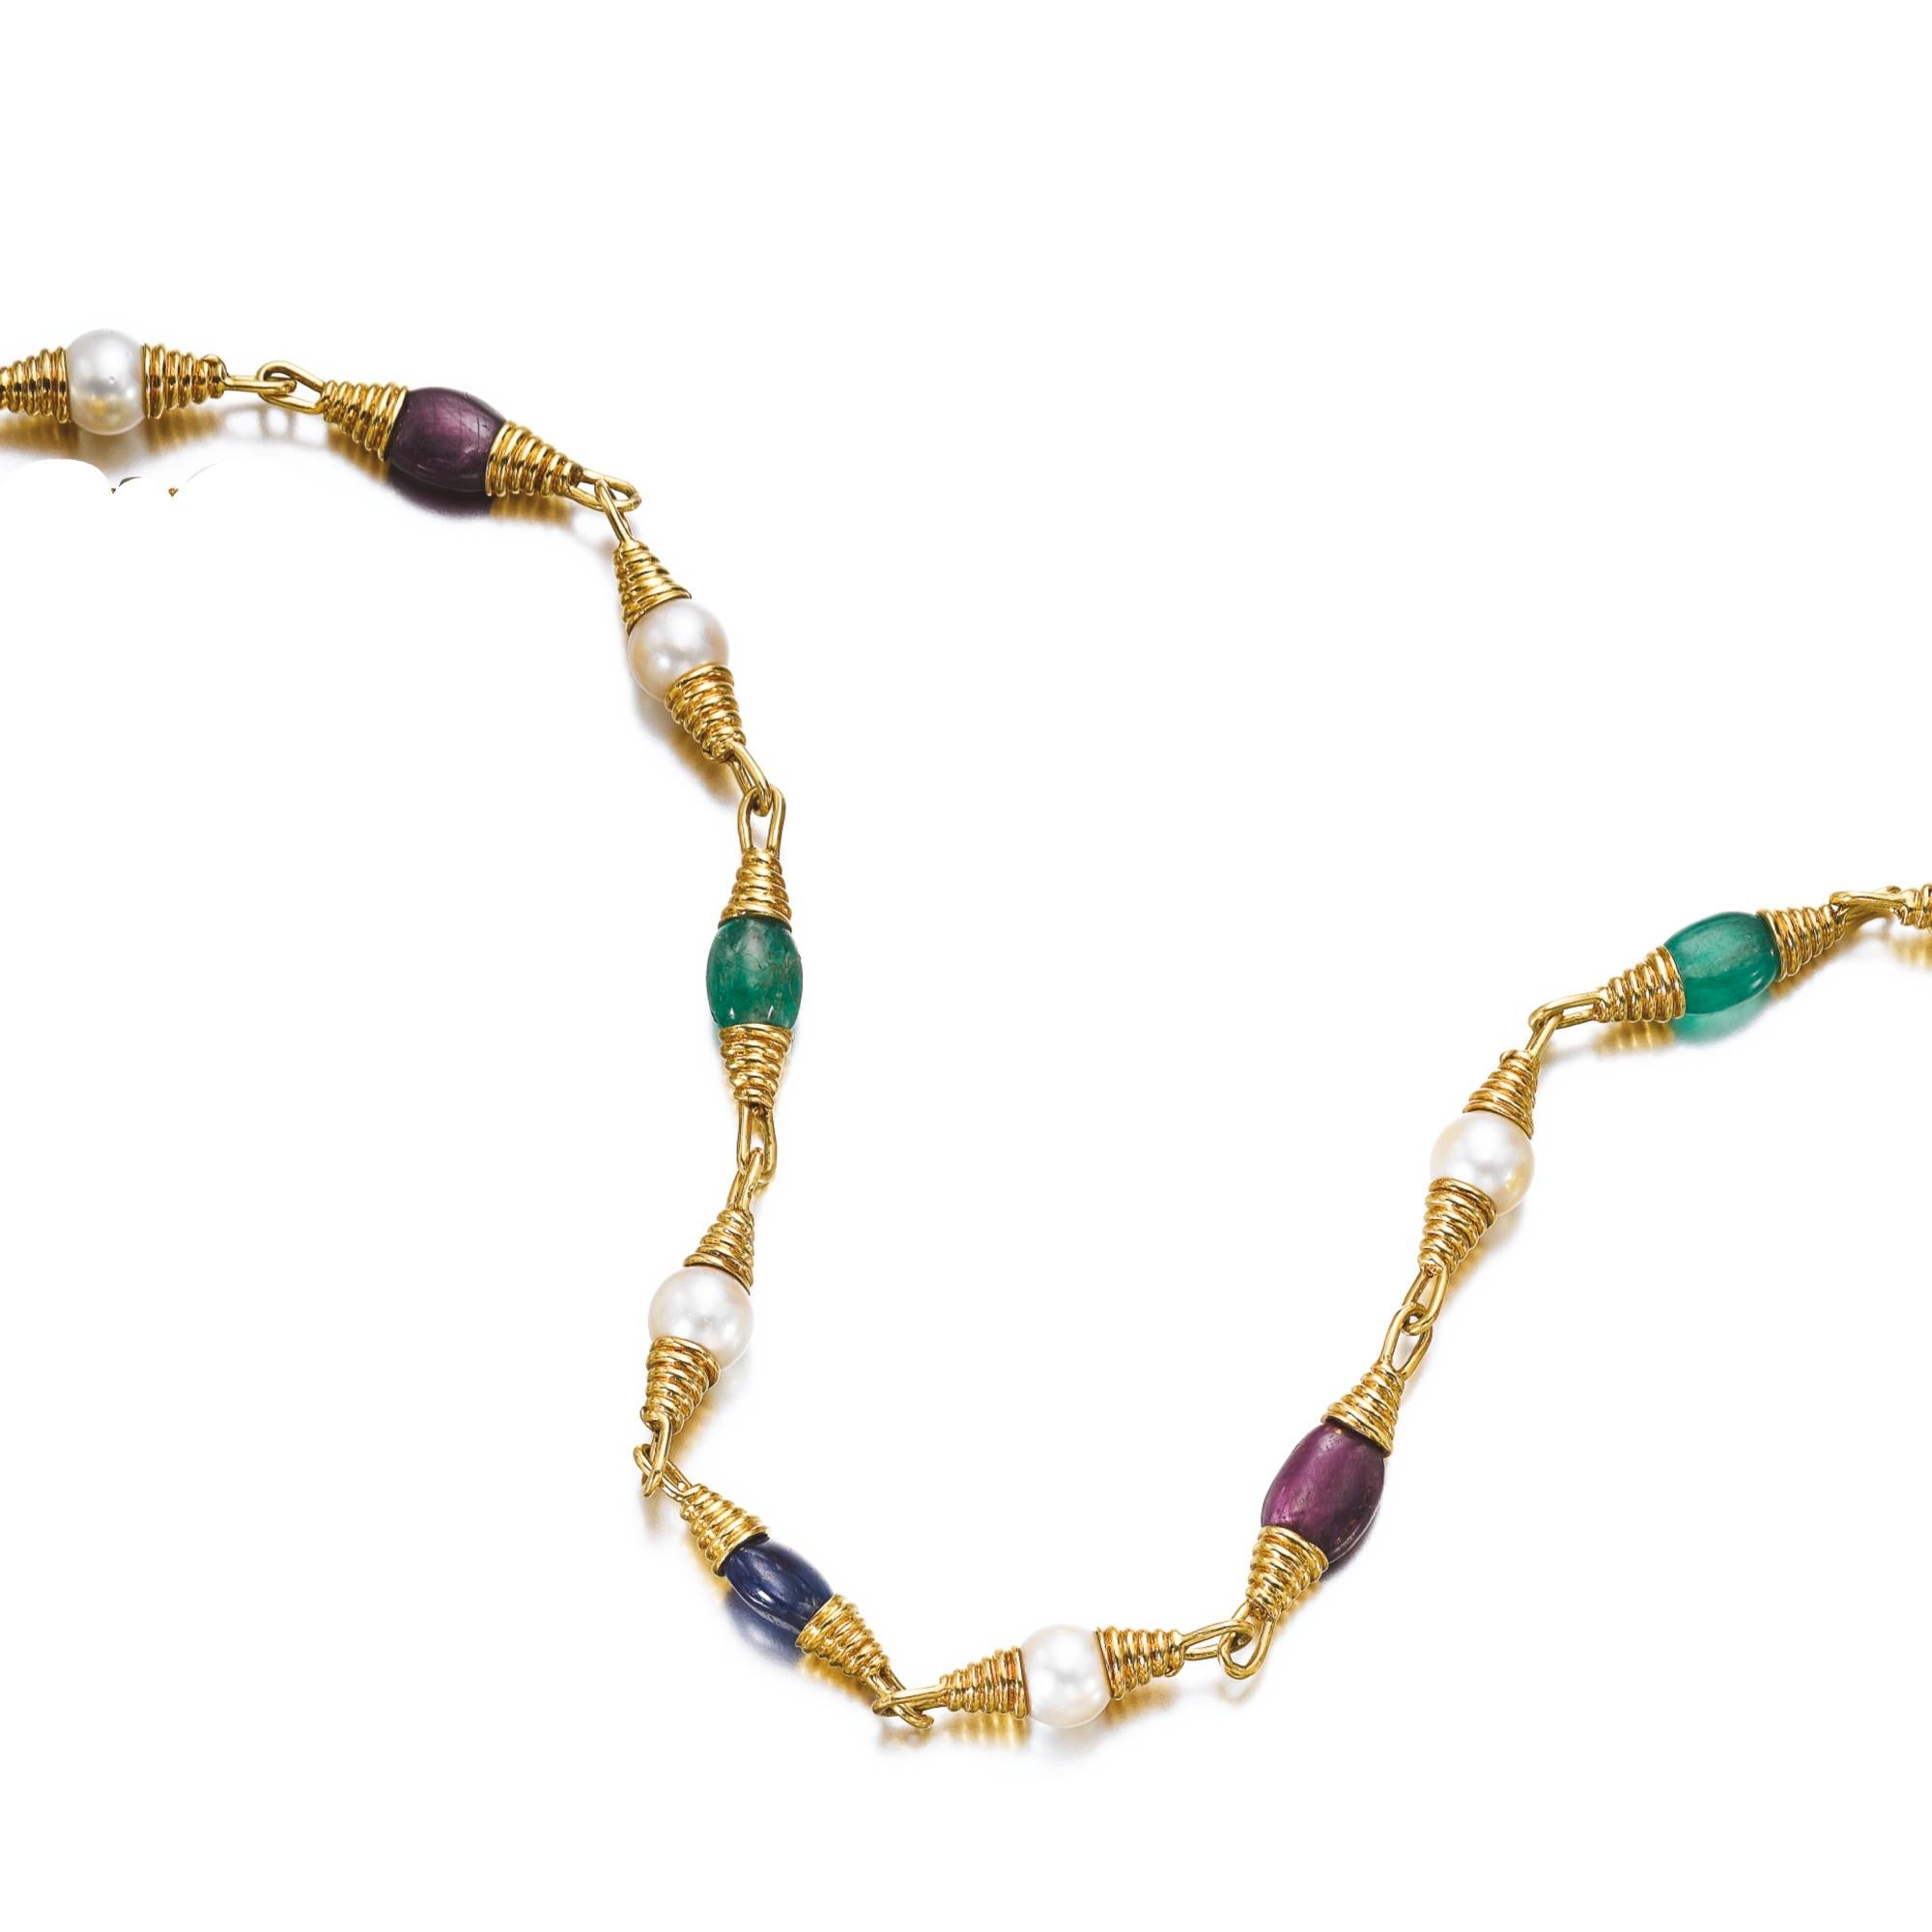 David Webb necklace of yellow gold with cultured pearls and emerald, ruby and sapphire beads. Length approximately 430mm, signed Webb and numbered. Made in in the US, circa 1975.